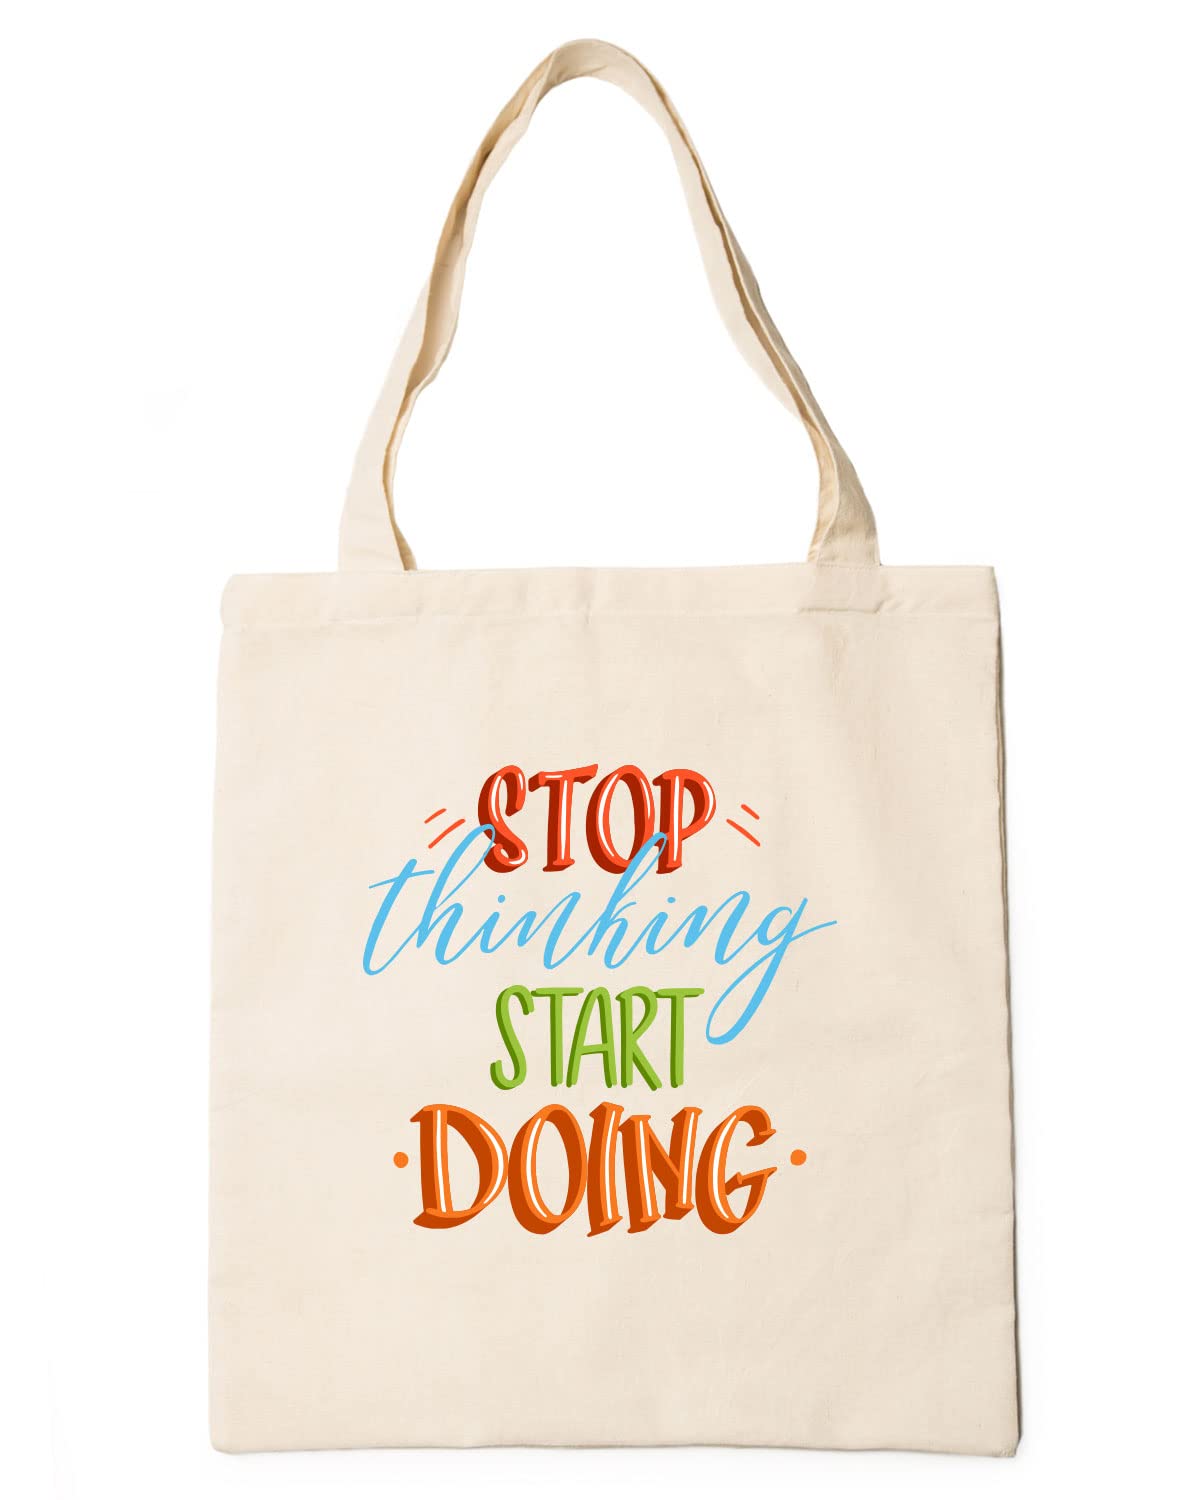 The Pink Magnet Stop Thinking Start Doing Tote Bag - Canvas Tote Bag for Women | Printed Multipurpose Cotton Bags | Cute Hand Bag for Girls | Best for College, Travel, Grocery | Reusable Shopping Bag | Eco-Friendly Tote Bag